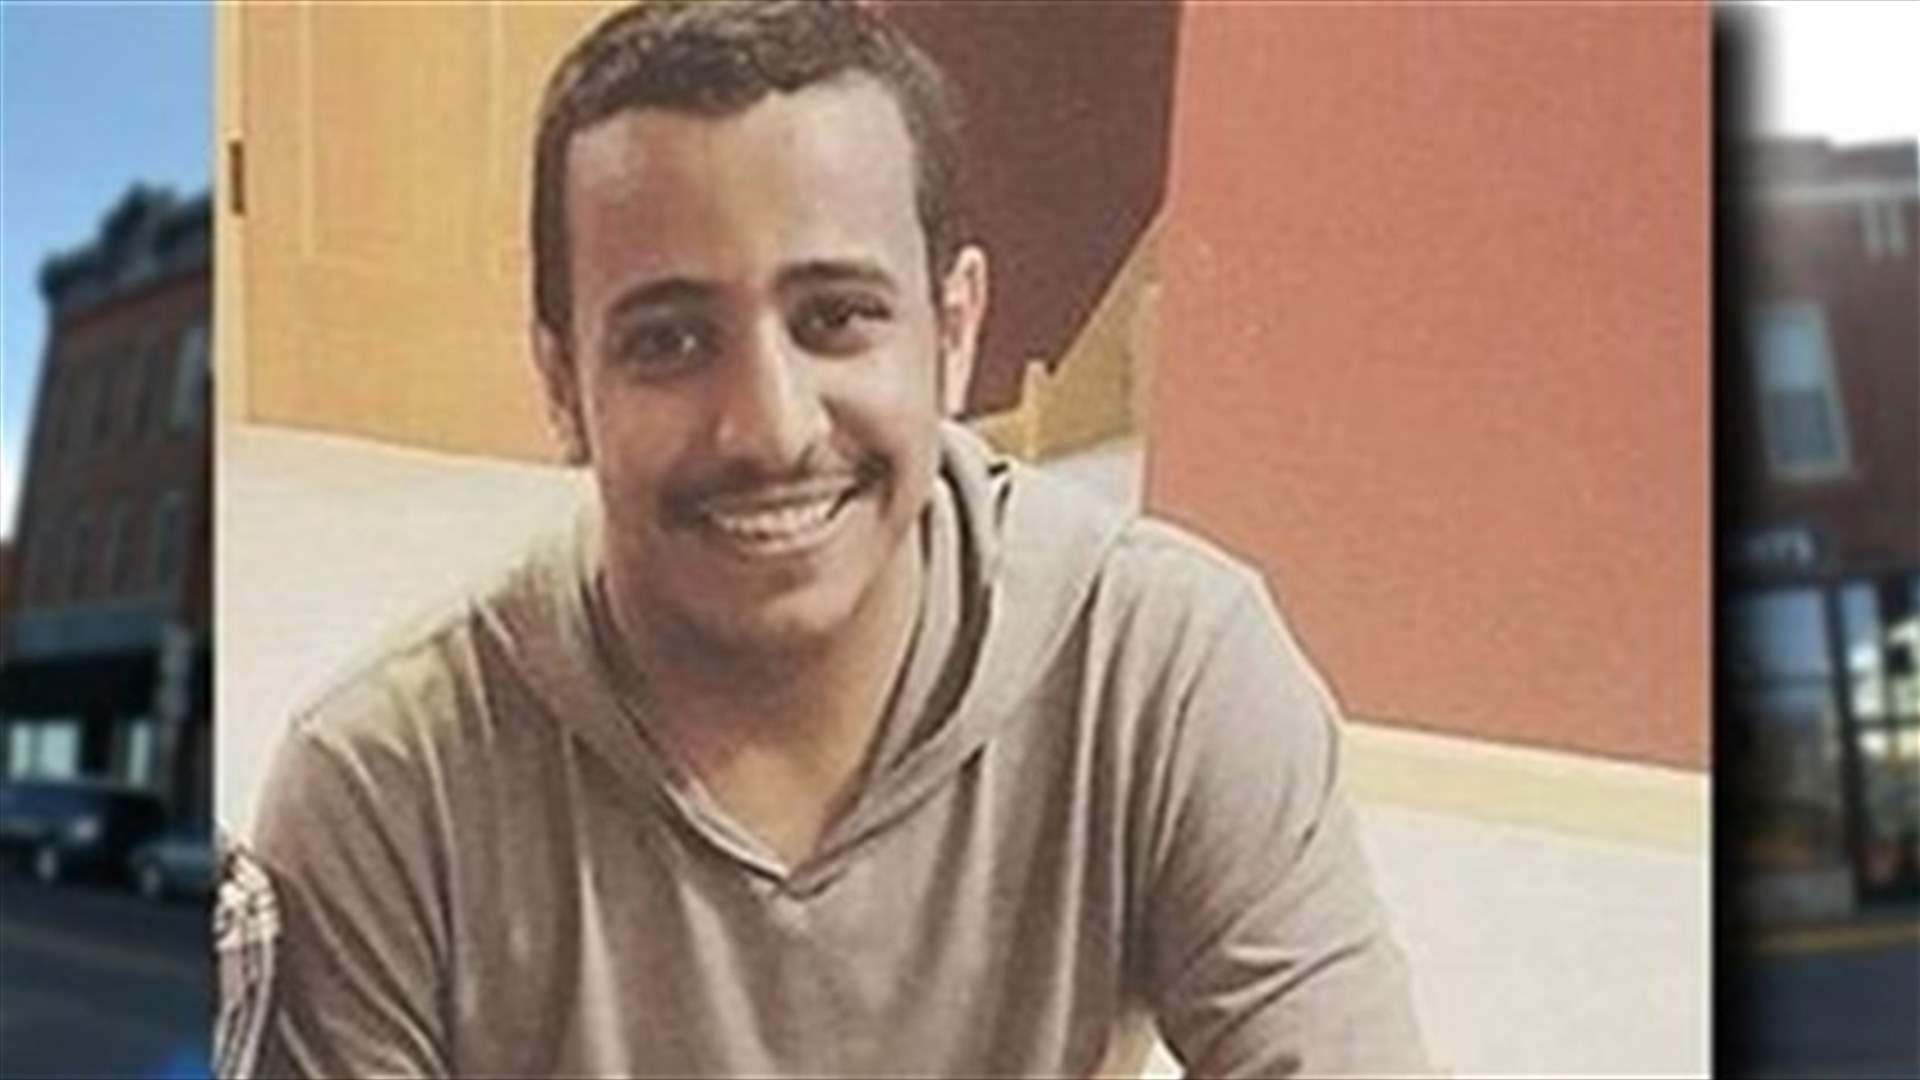 Man arrested in slaying of Saudi college student in Wisconsin